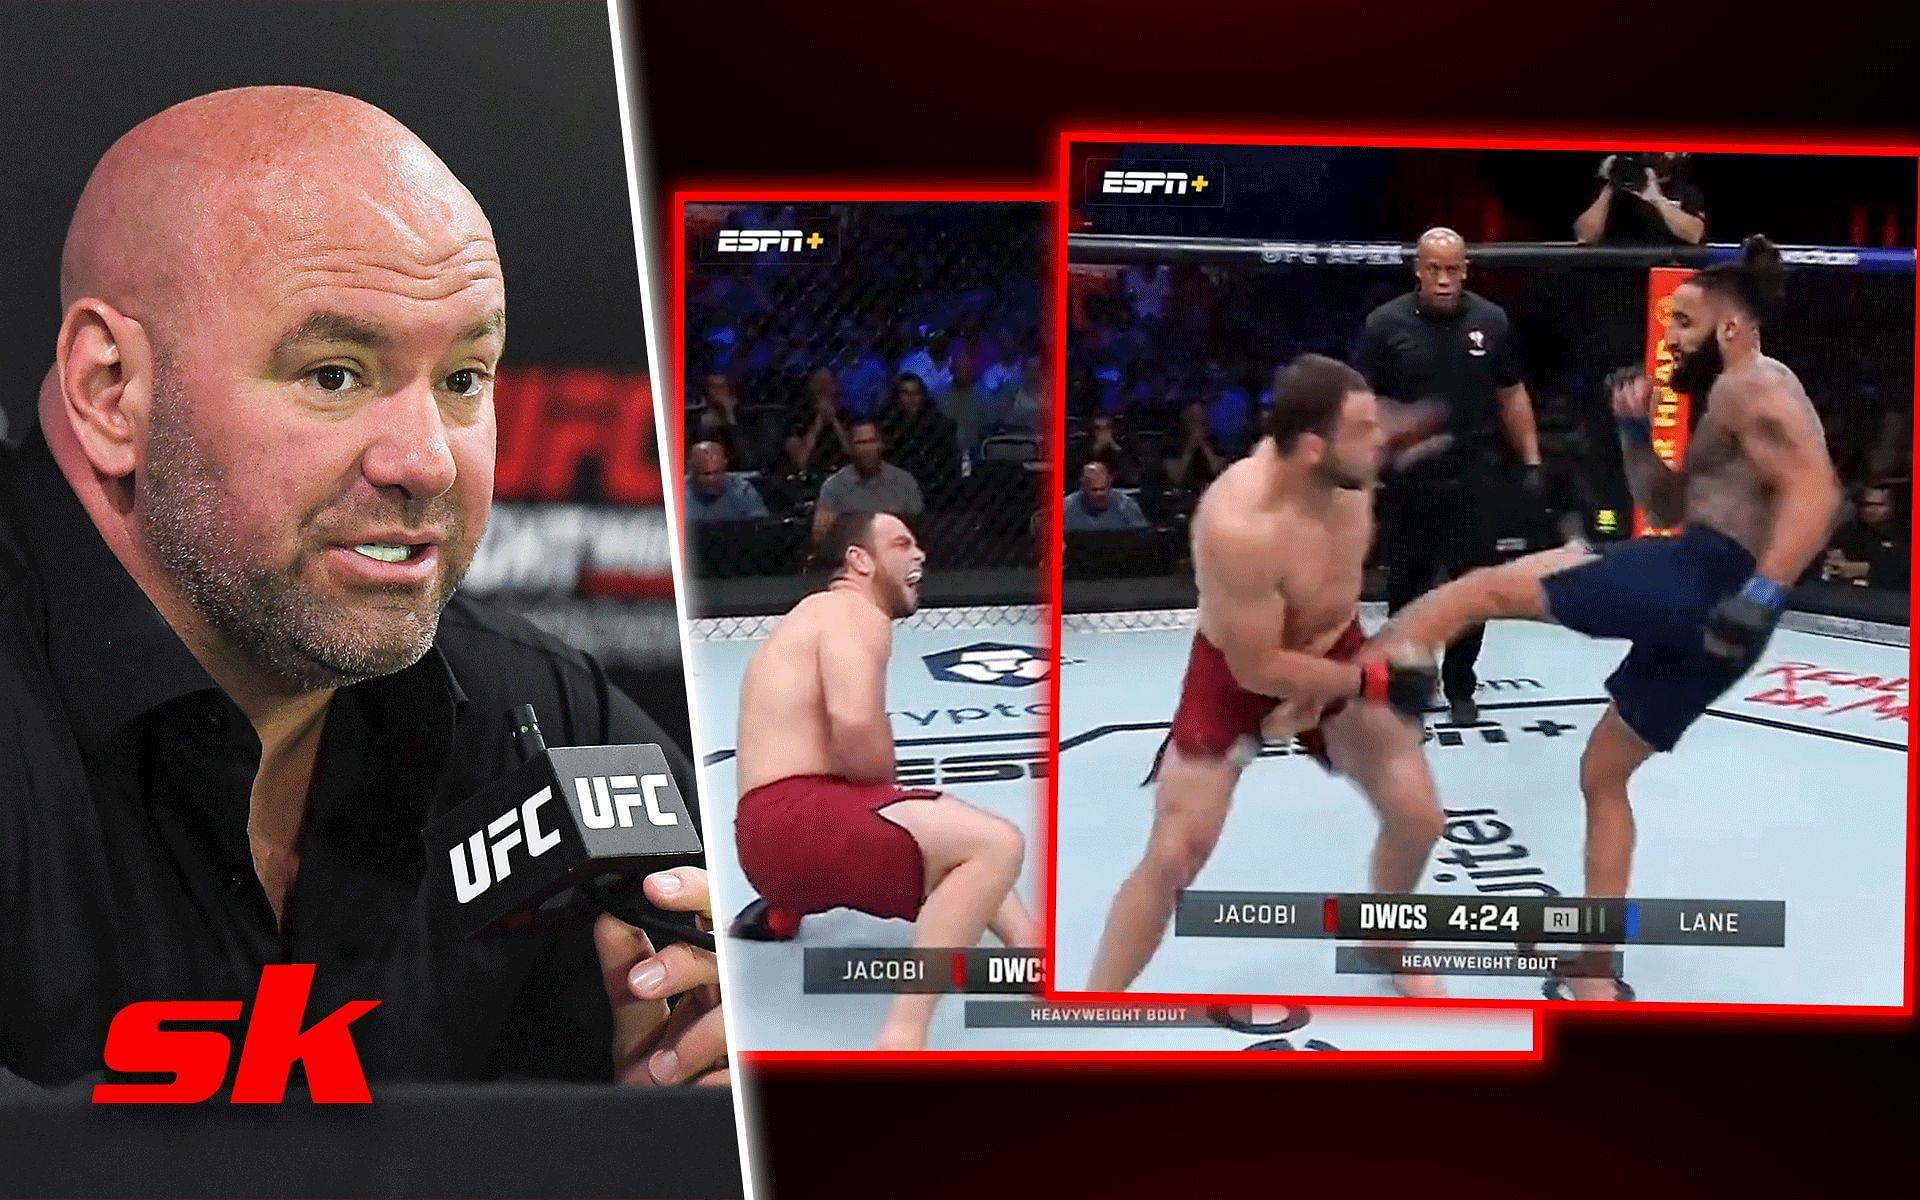 Dana White completely denies that he was laughing at brutal groin kick in DWCS fight [Images via @espnmma on Twitter, rest via Getty]